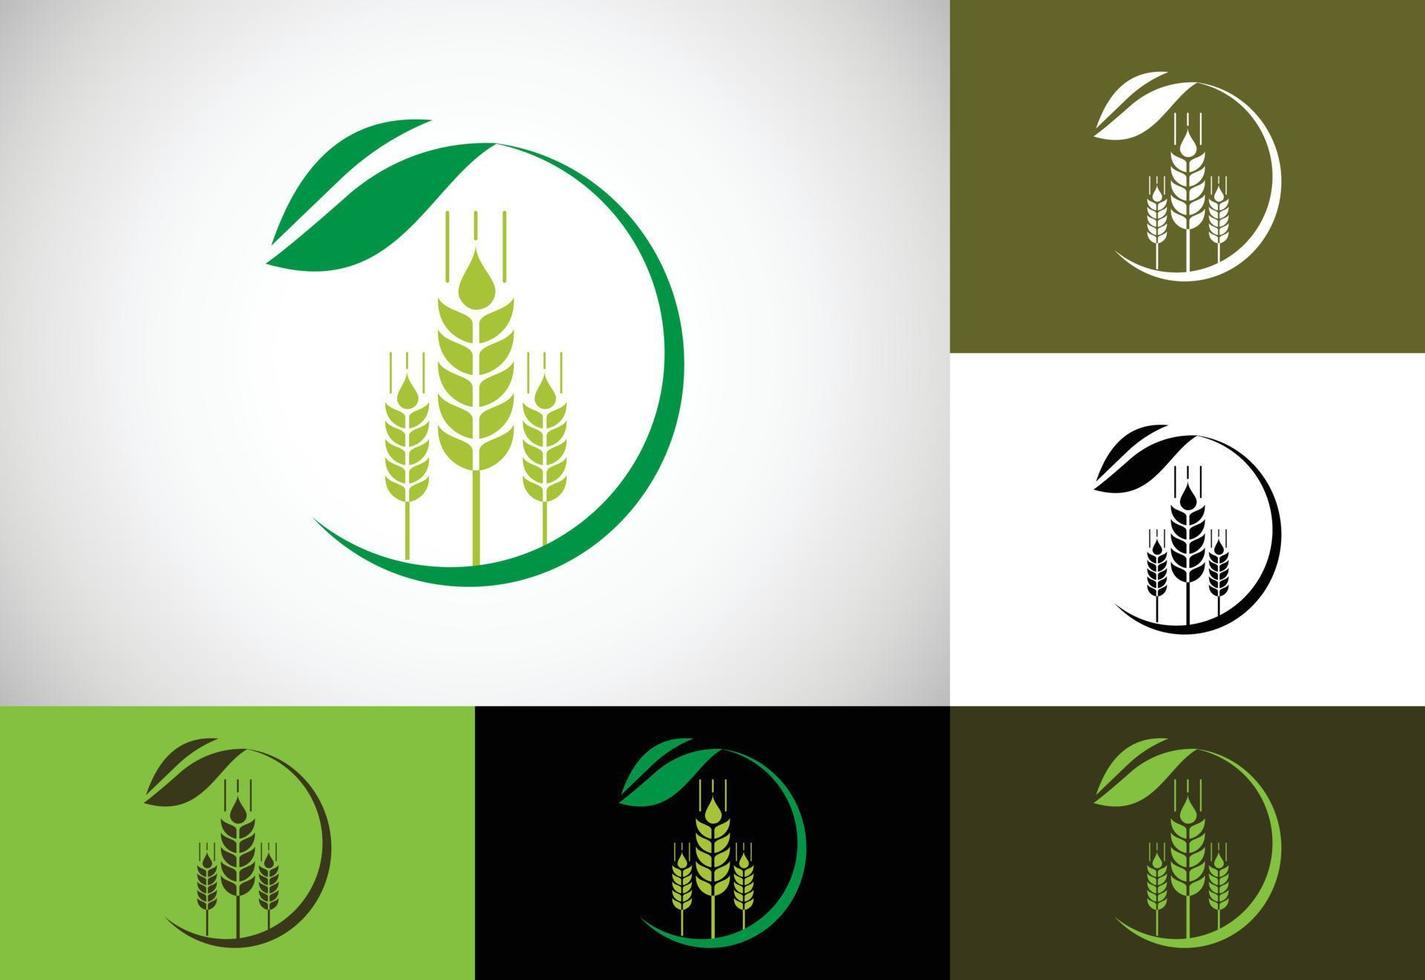 Wheat Ears Icon and Logo. For Identity Style of Natural Product Company and Farm Company. Agricultural symbols vector